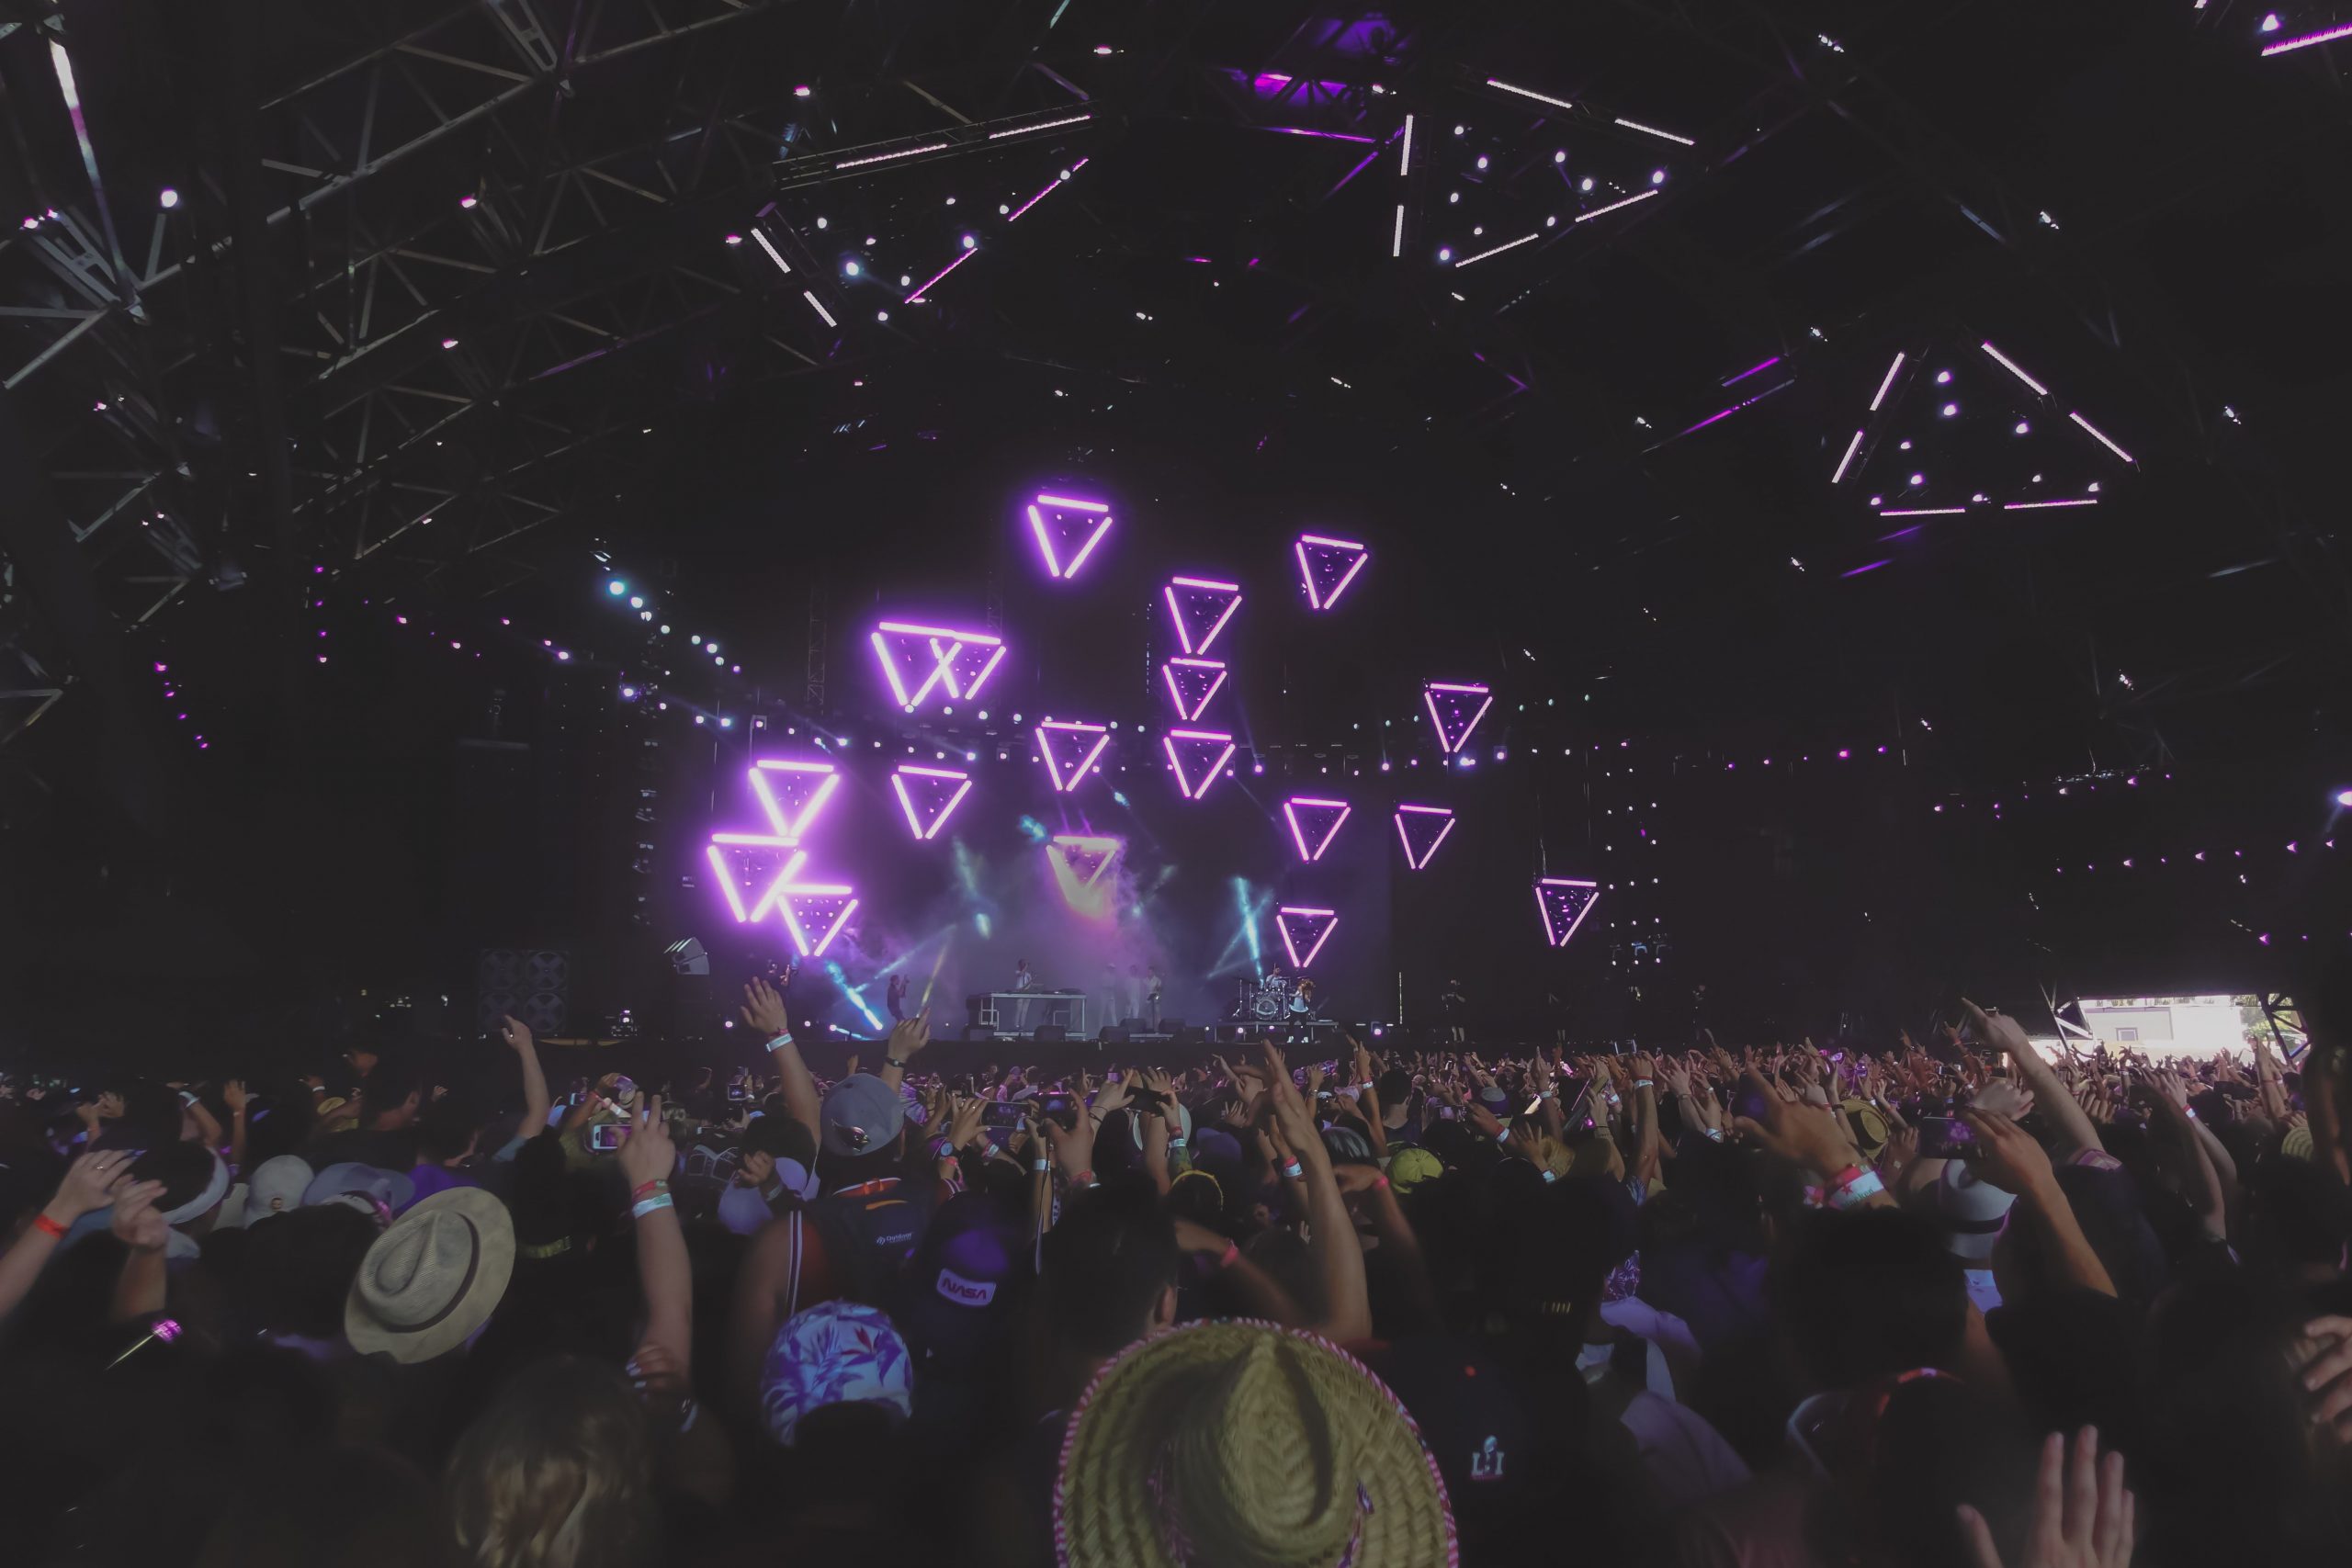 Coachella 2022 COVID guidelines: No vaccinations, negative tests, or masks required